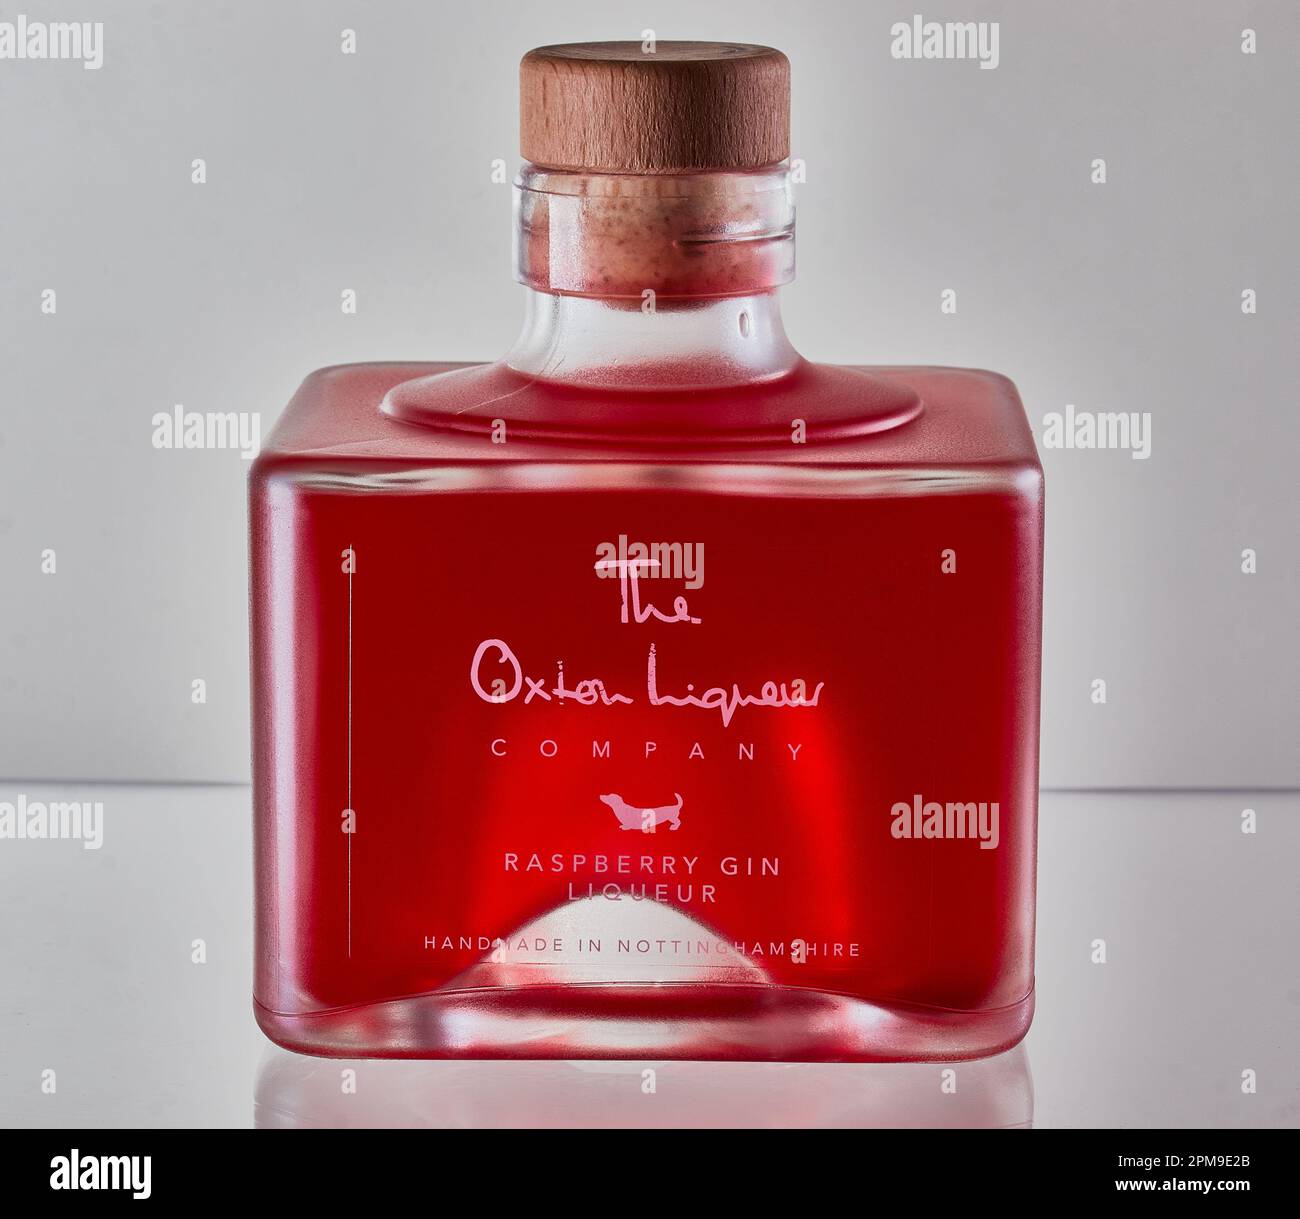 Mansfield,Nottingham,United Kingdom:Studio product image of a bottle of The Oxton Liqueur. Stock Photo